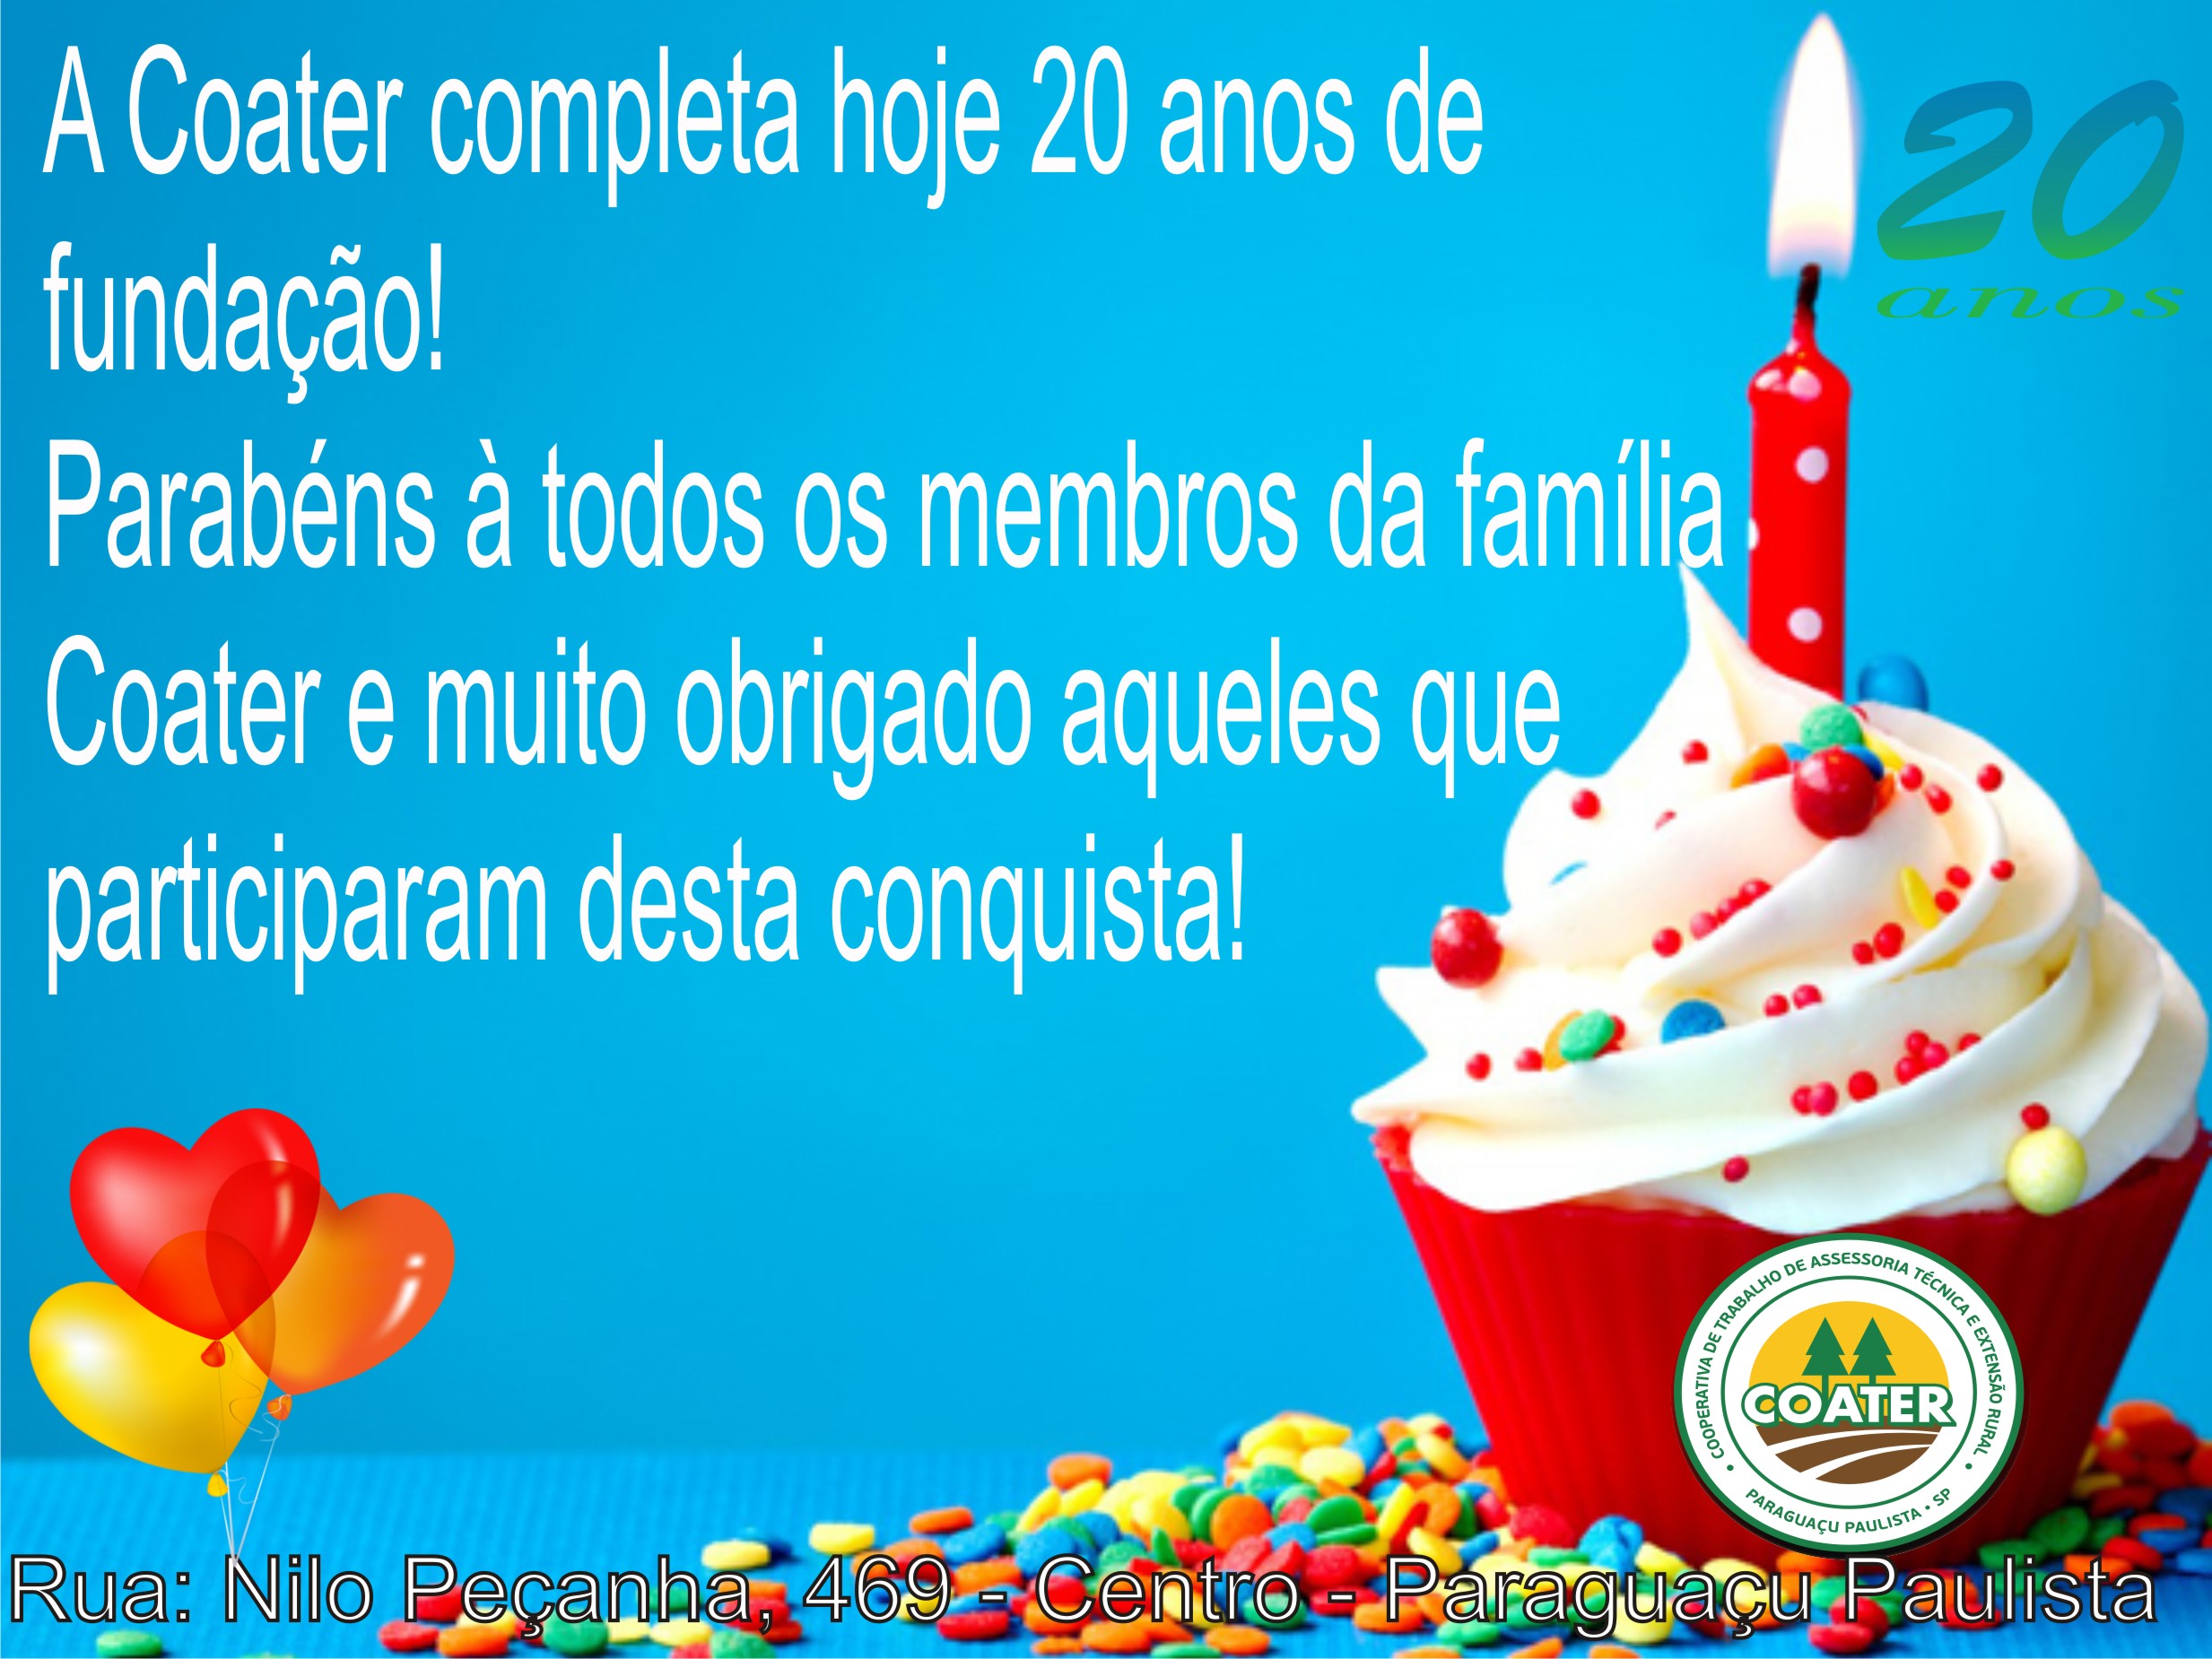 Coater 20 anos